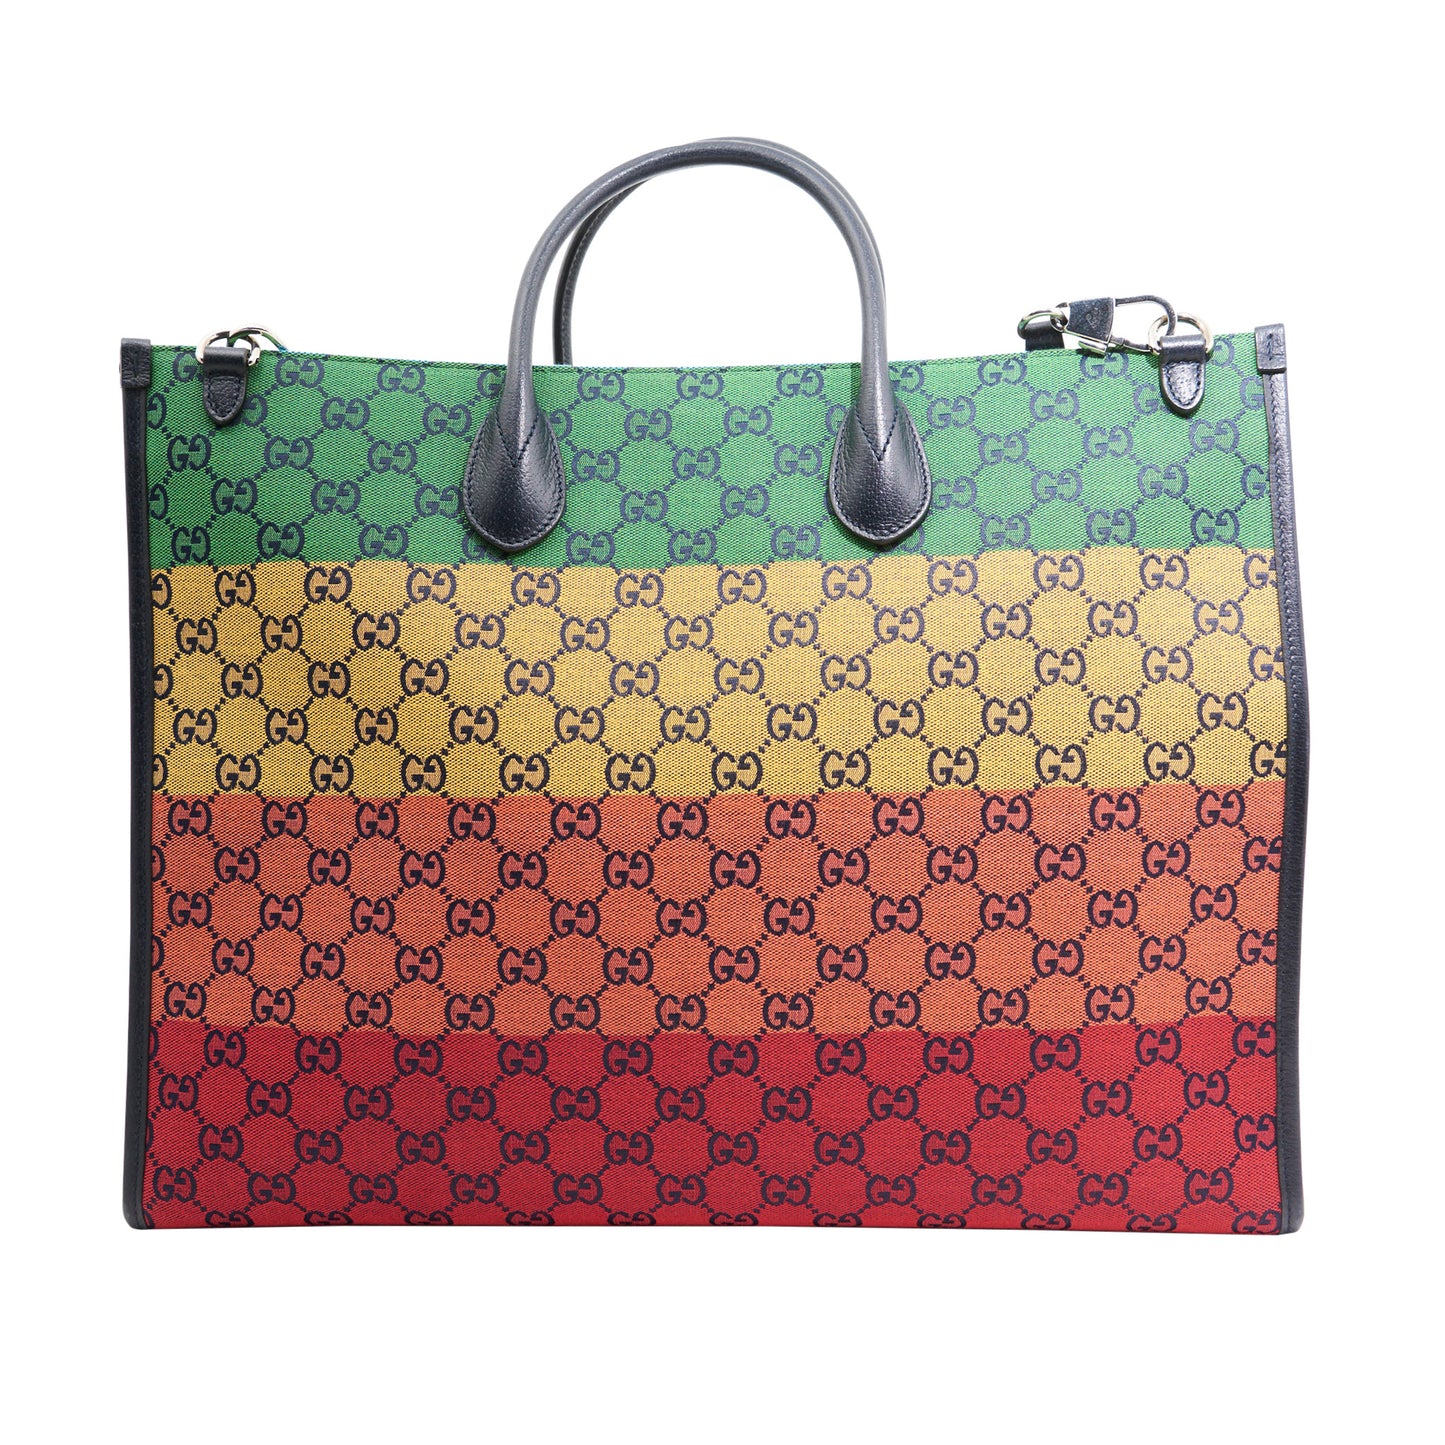 Gucci Canvas Rainbow GG Large Tote in Rainbow Monogram